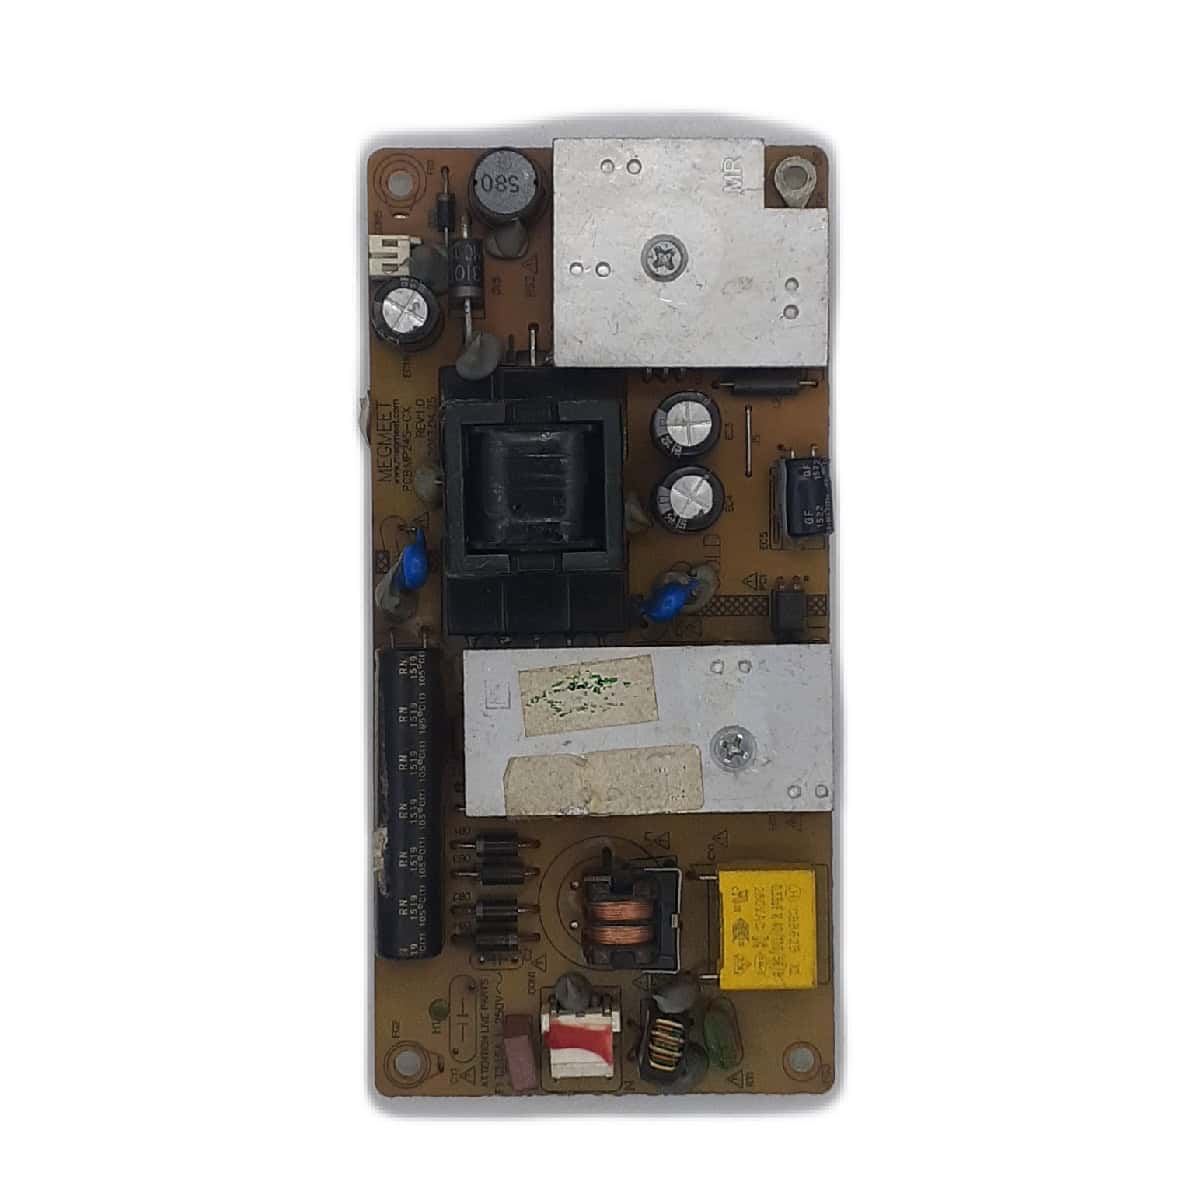 CREL7066 CROMA POWER SUPPLY BOARD FOR LED TV